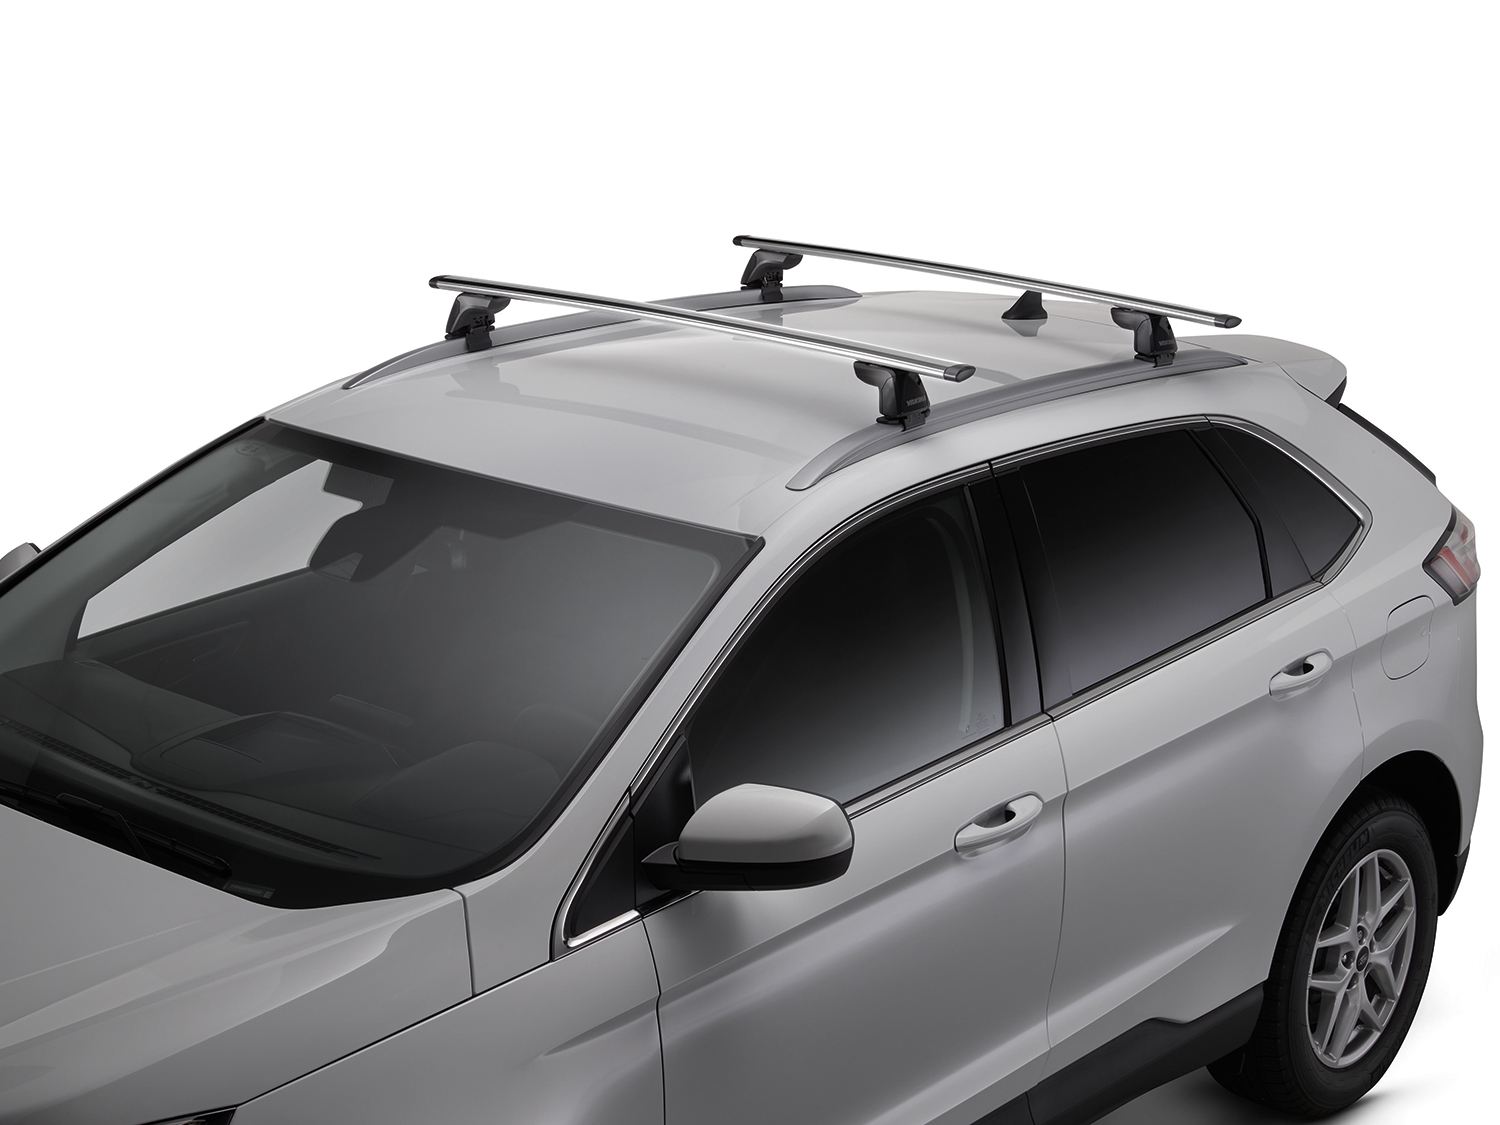 Image for Racks and Carriers by Yakima - Roof Cross Bar Kit, For Use with Roof Rails from AccessoriesCanada